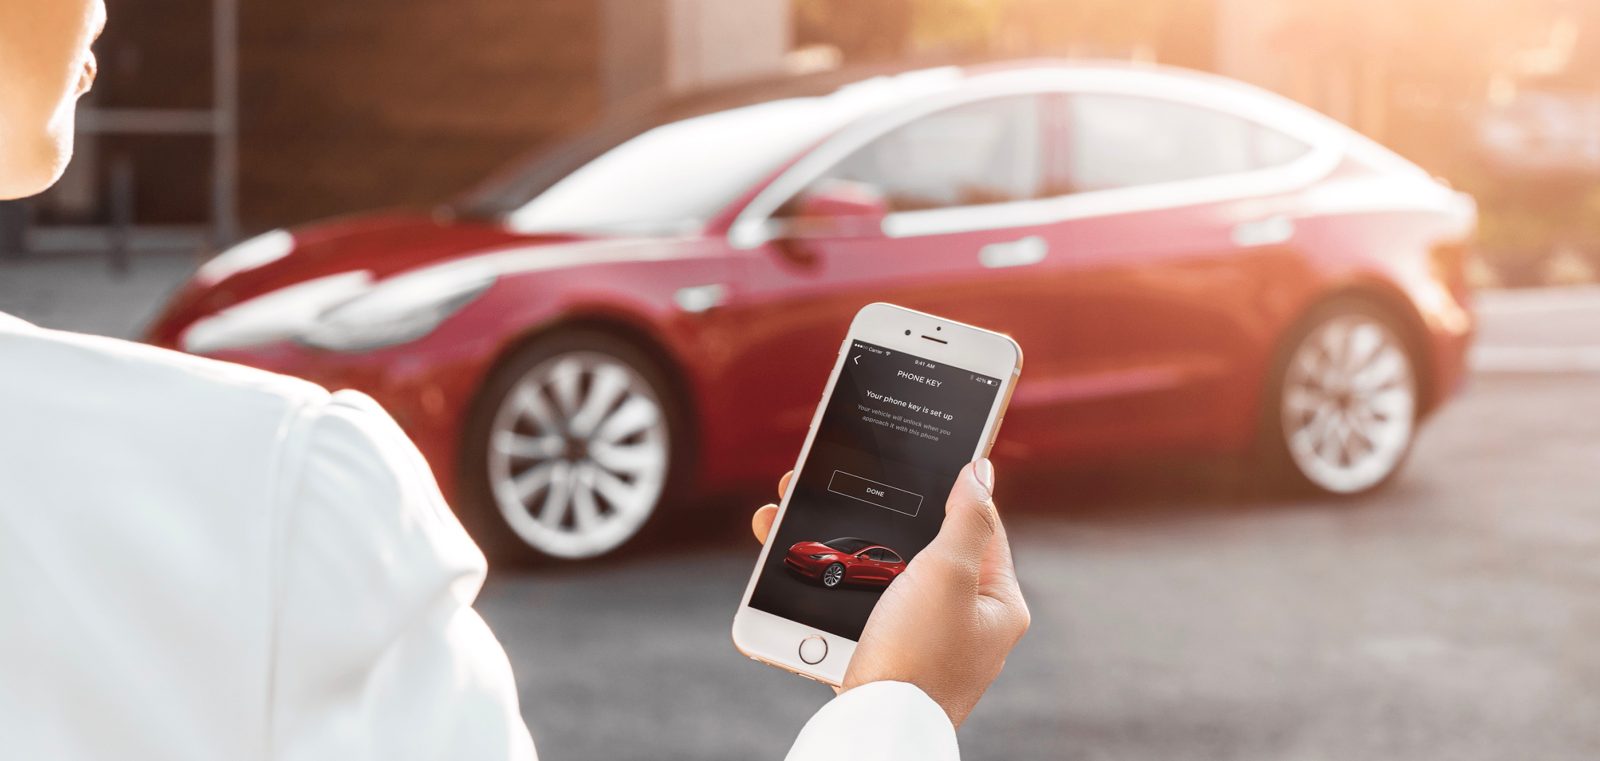 Tesla is considering adopting Apple's AirPlay to improve audio quality